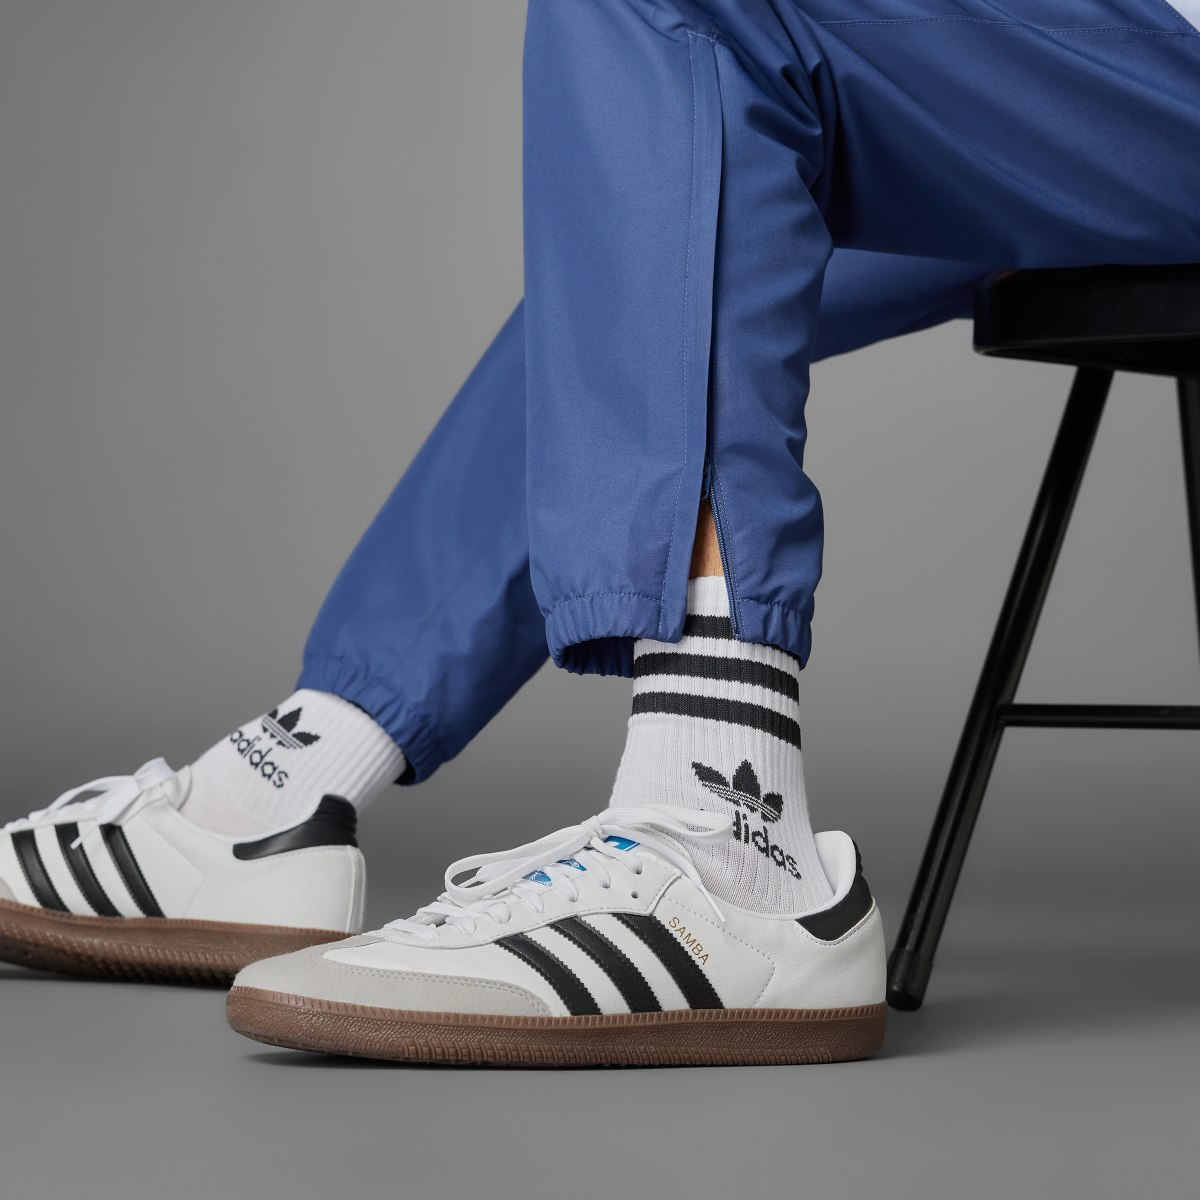 Adidas Argentina 1994 Woven Track Pants. 7